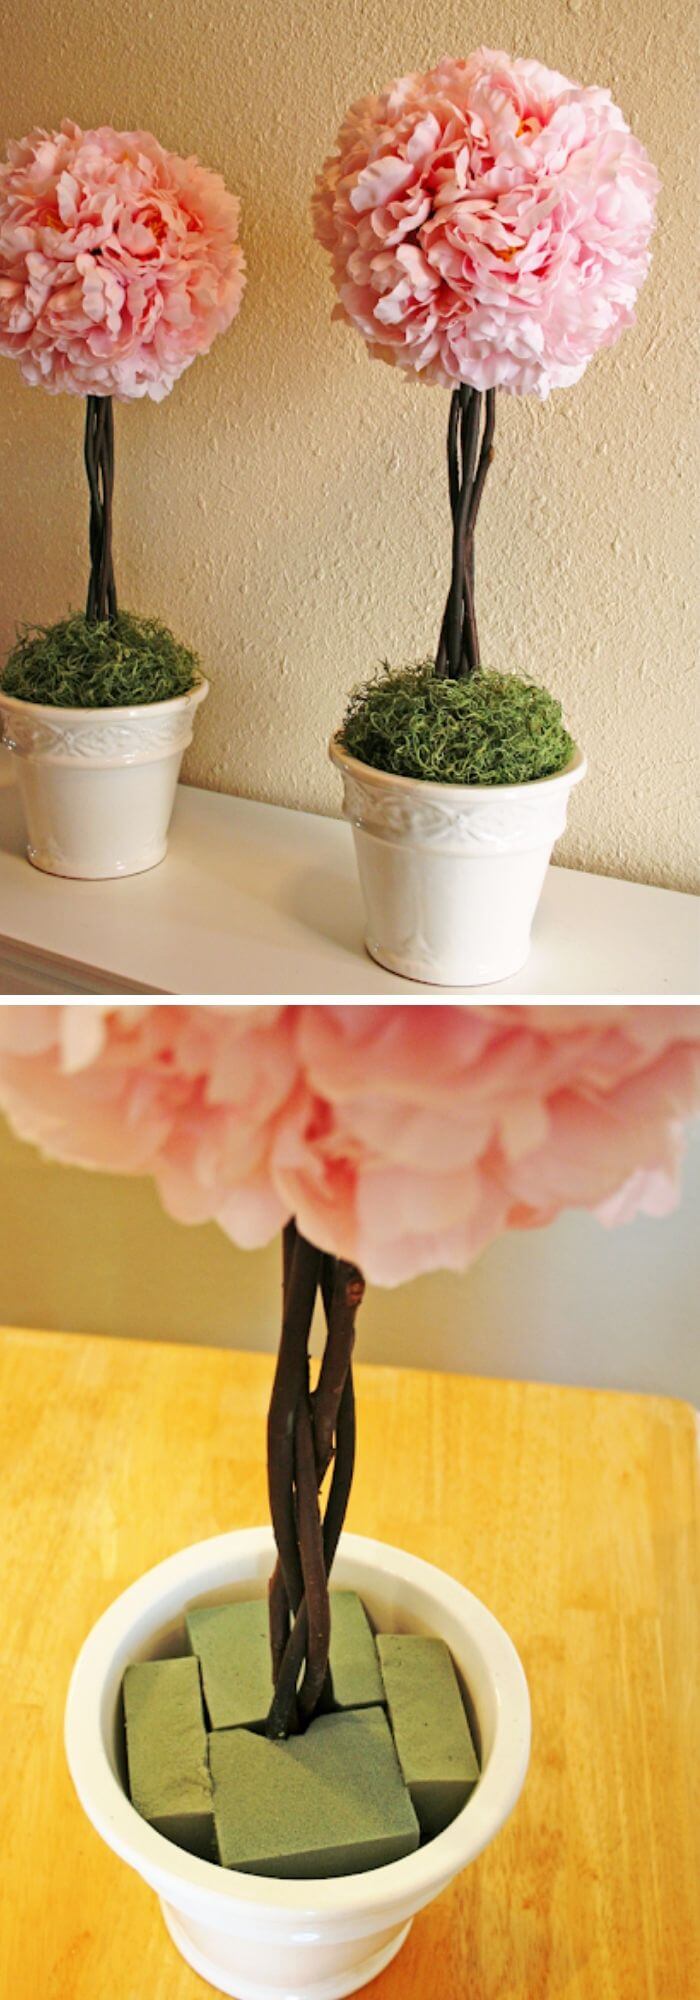 how to make a topiary tree in pot for beginners DIY peony topiaries